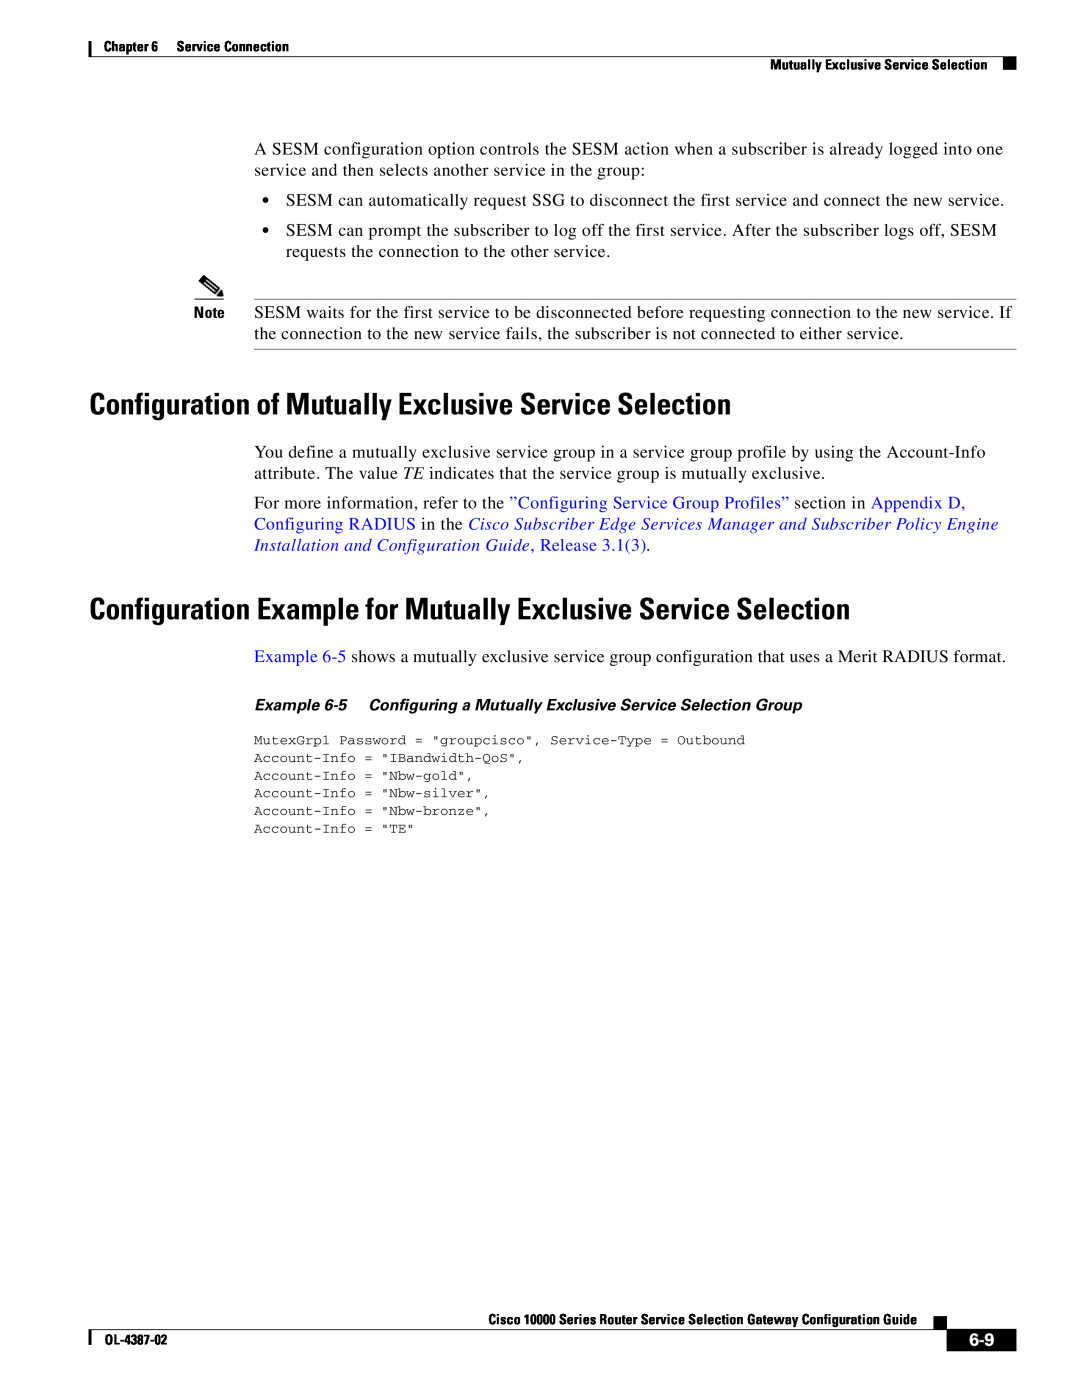 Cisco Systems OL-4387-02 manual Configuration of Mutually Exclusive Service Selection 